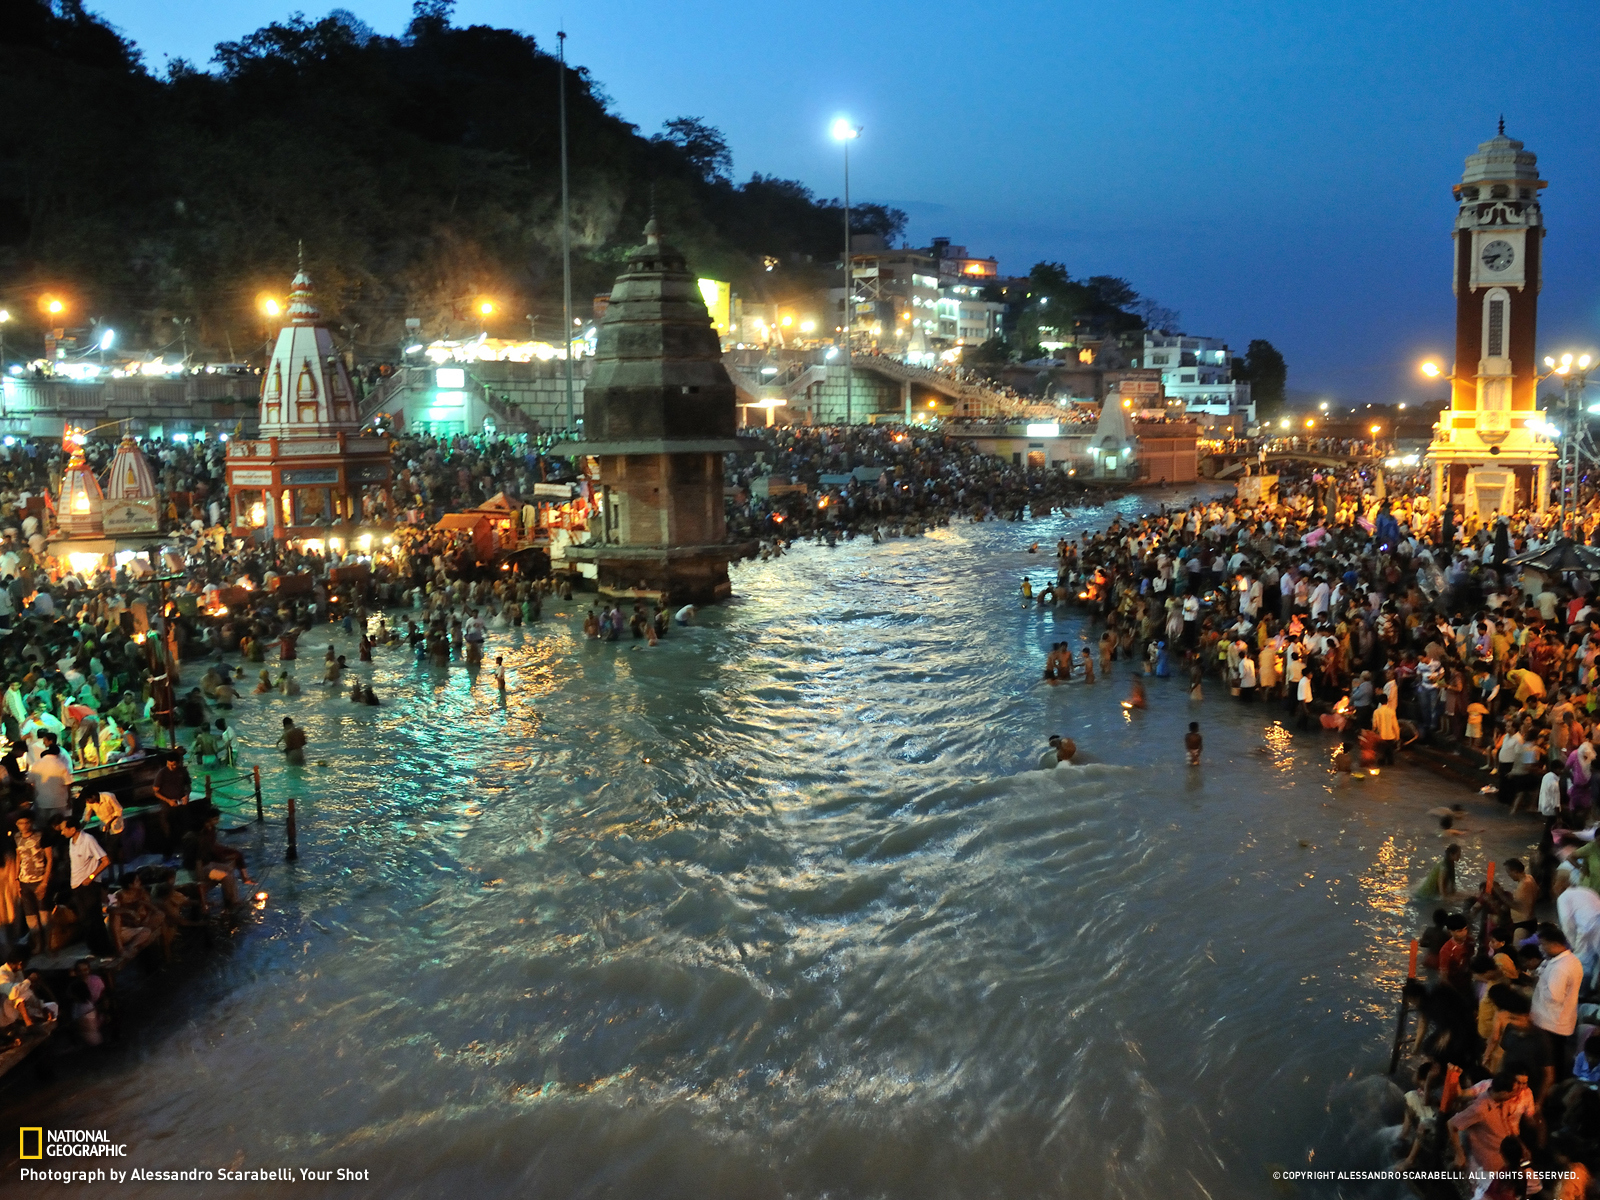 Hindus gather by the millions along the shores of the Ganges River in the city of Haridwar, in Uttarakhand, north-central India. They consider Haridwar one of HinduismÕs seven holiest sites and flock to the river to ritualistically wash away their sins.